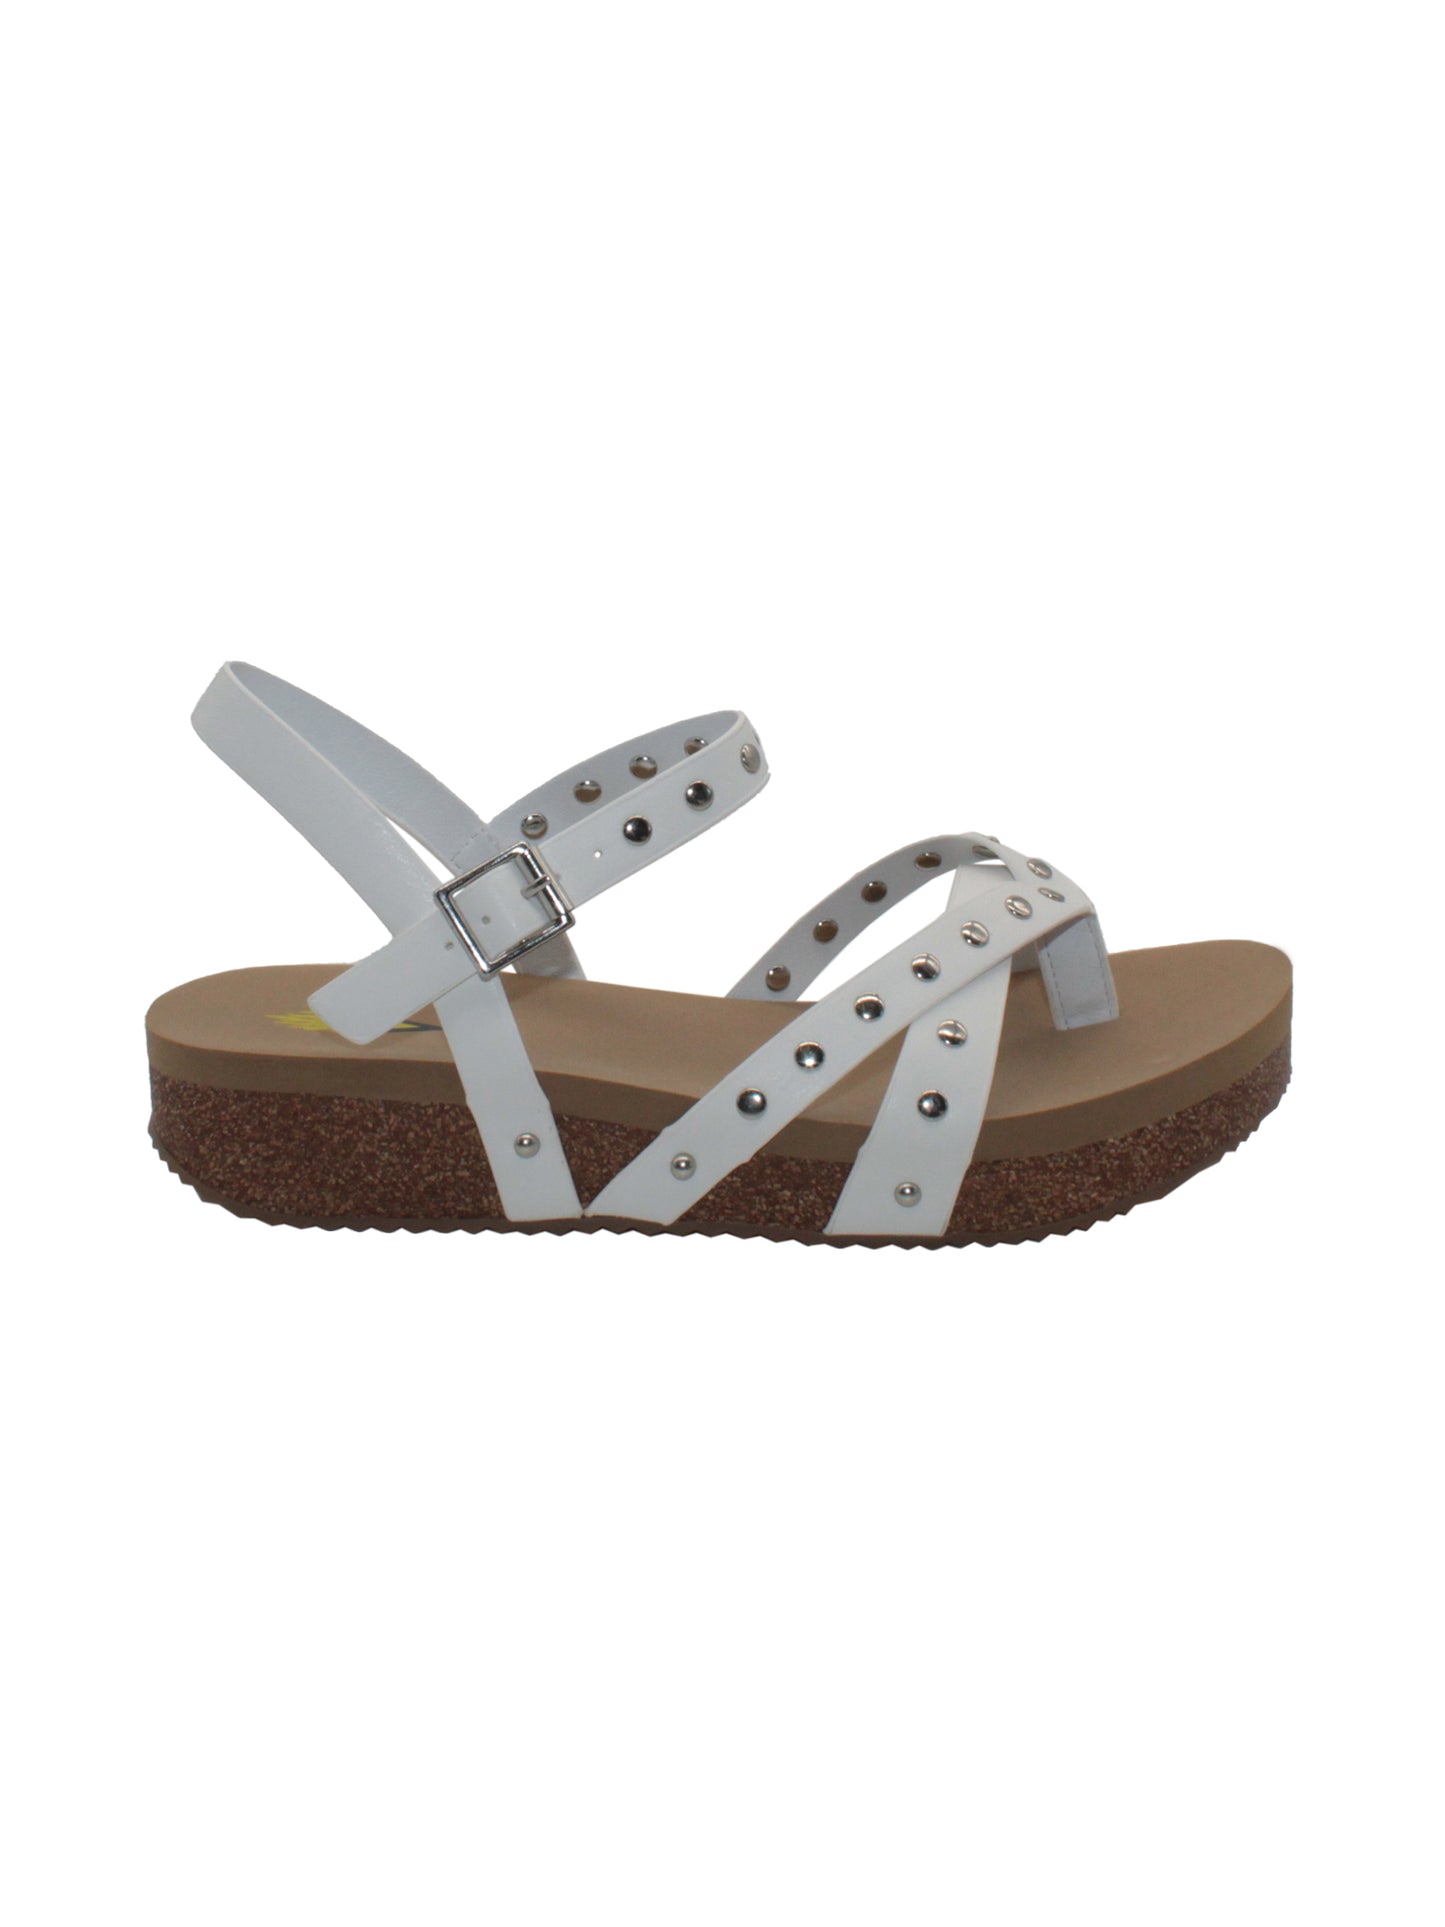  Volatile's Kelton sandal in a vegan leather is our warm weather staple. The low platform wedge adds a subtle lift while offering stability, perfect for dressing up weekend wear or keeping fashionably comfortable at the next outdoor party. Style them with everything, from shorts to dresses, and more. white 